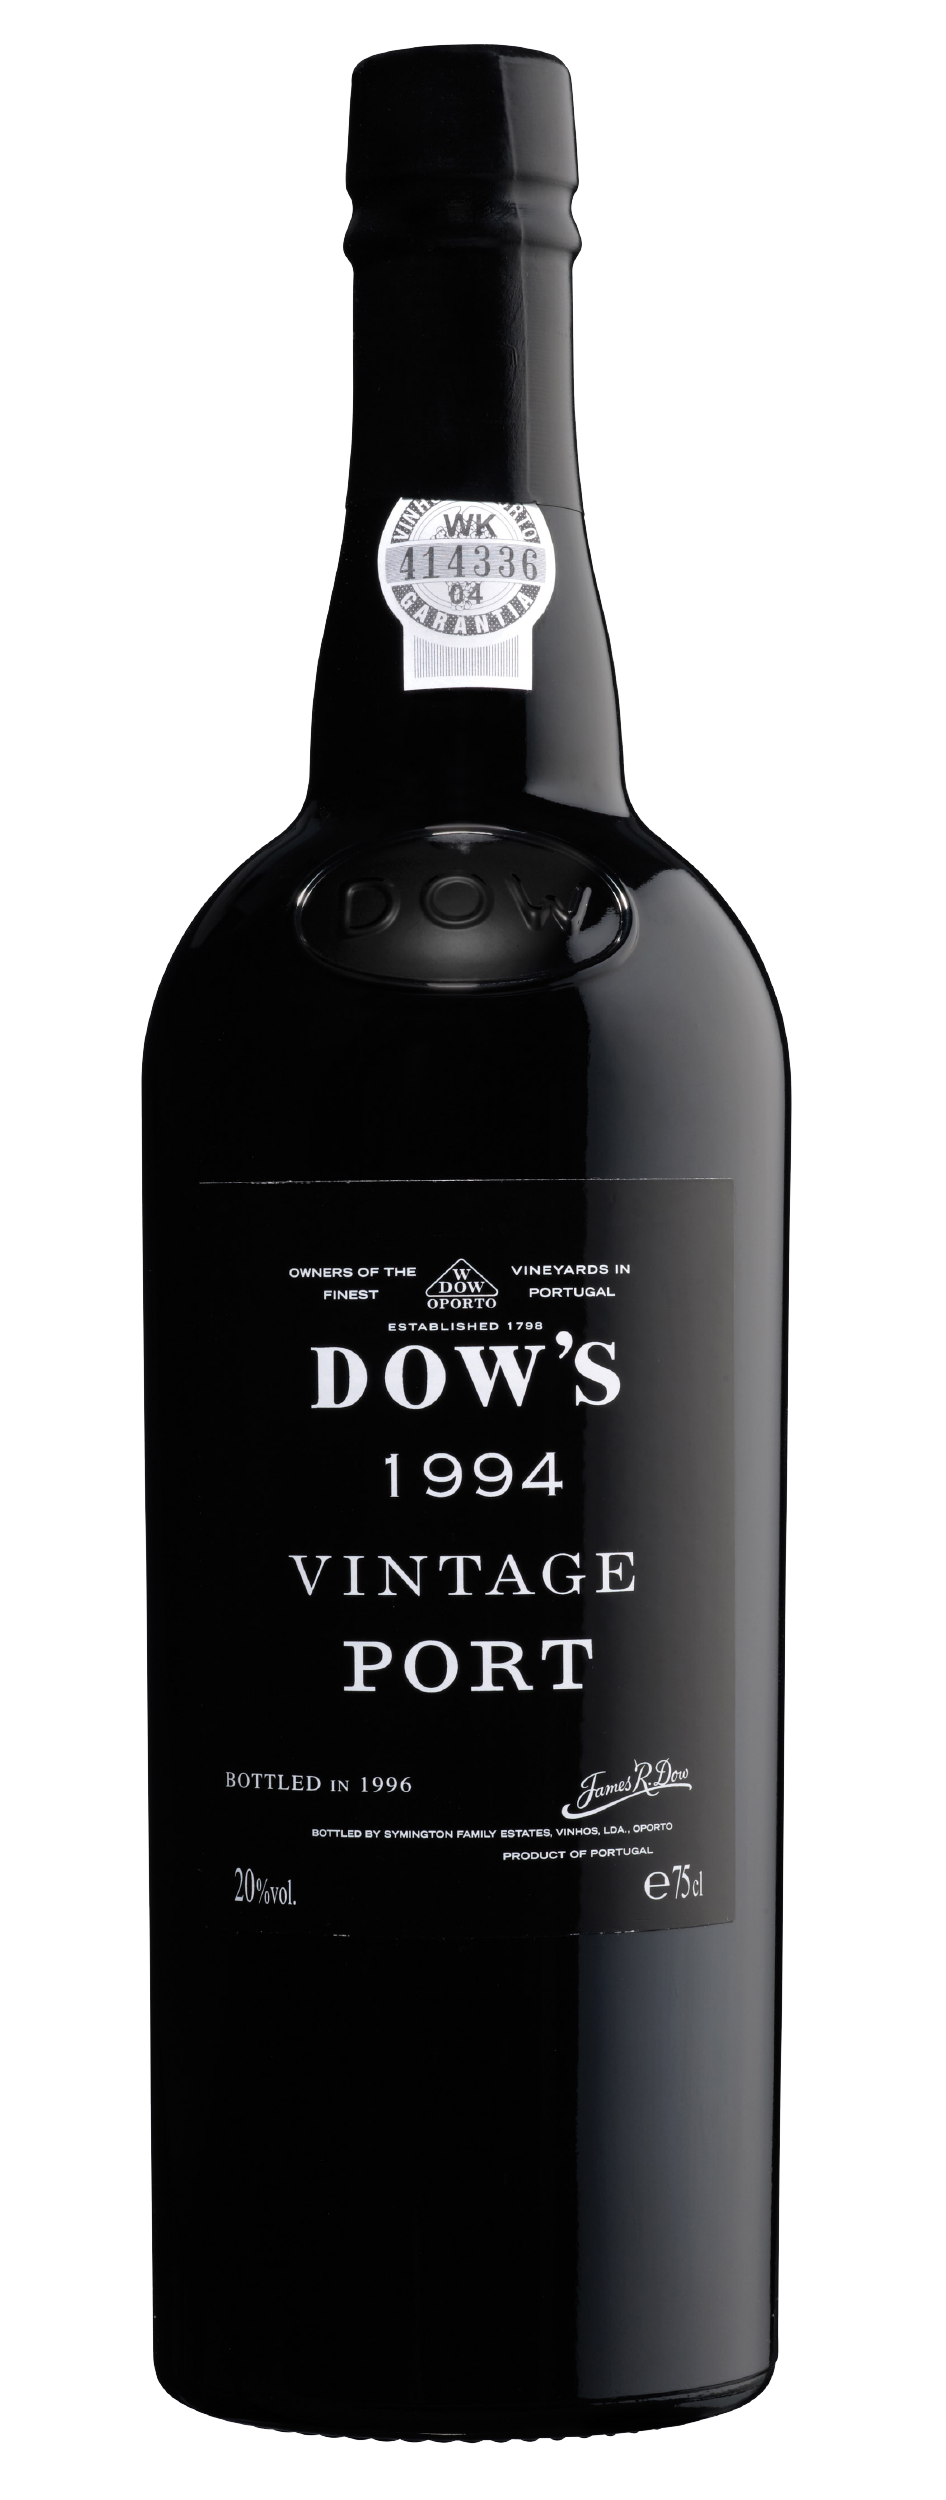 Product Image for DOW'S VINTAGE PORT 1994